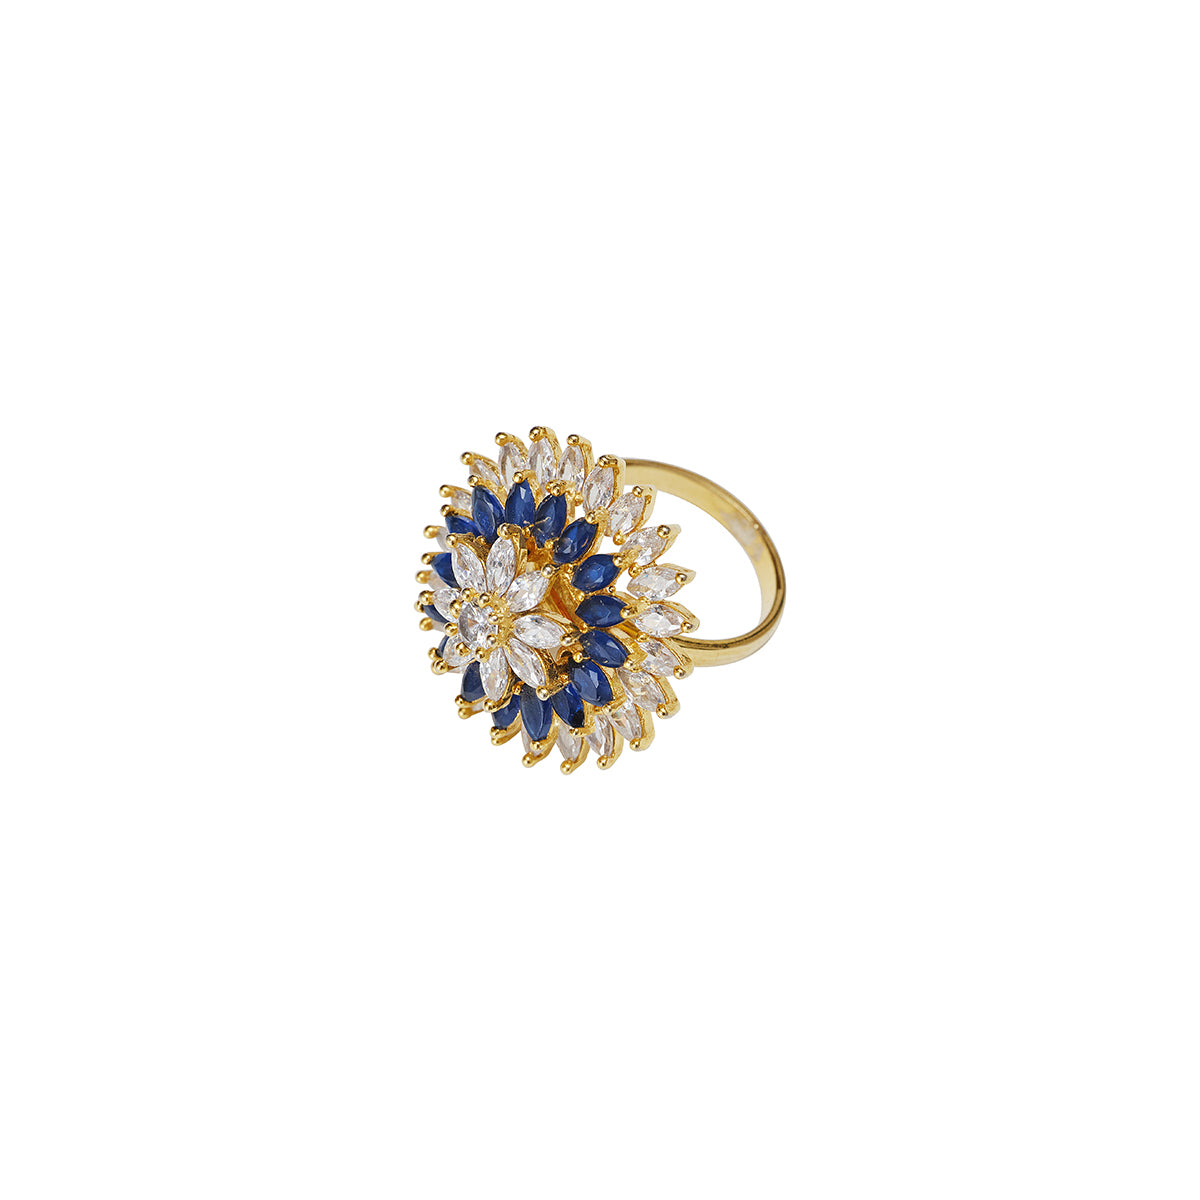 Magai White and blue ring in a floral circular arrangement , three layers of white stones and blue stones mounted on gold. Maheswary collection by Veronica Tharmalingam